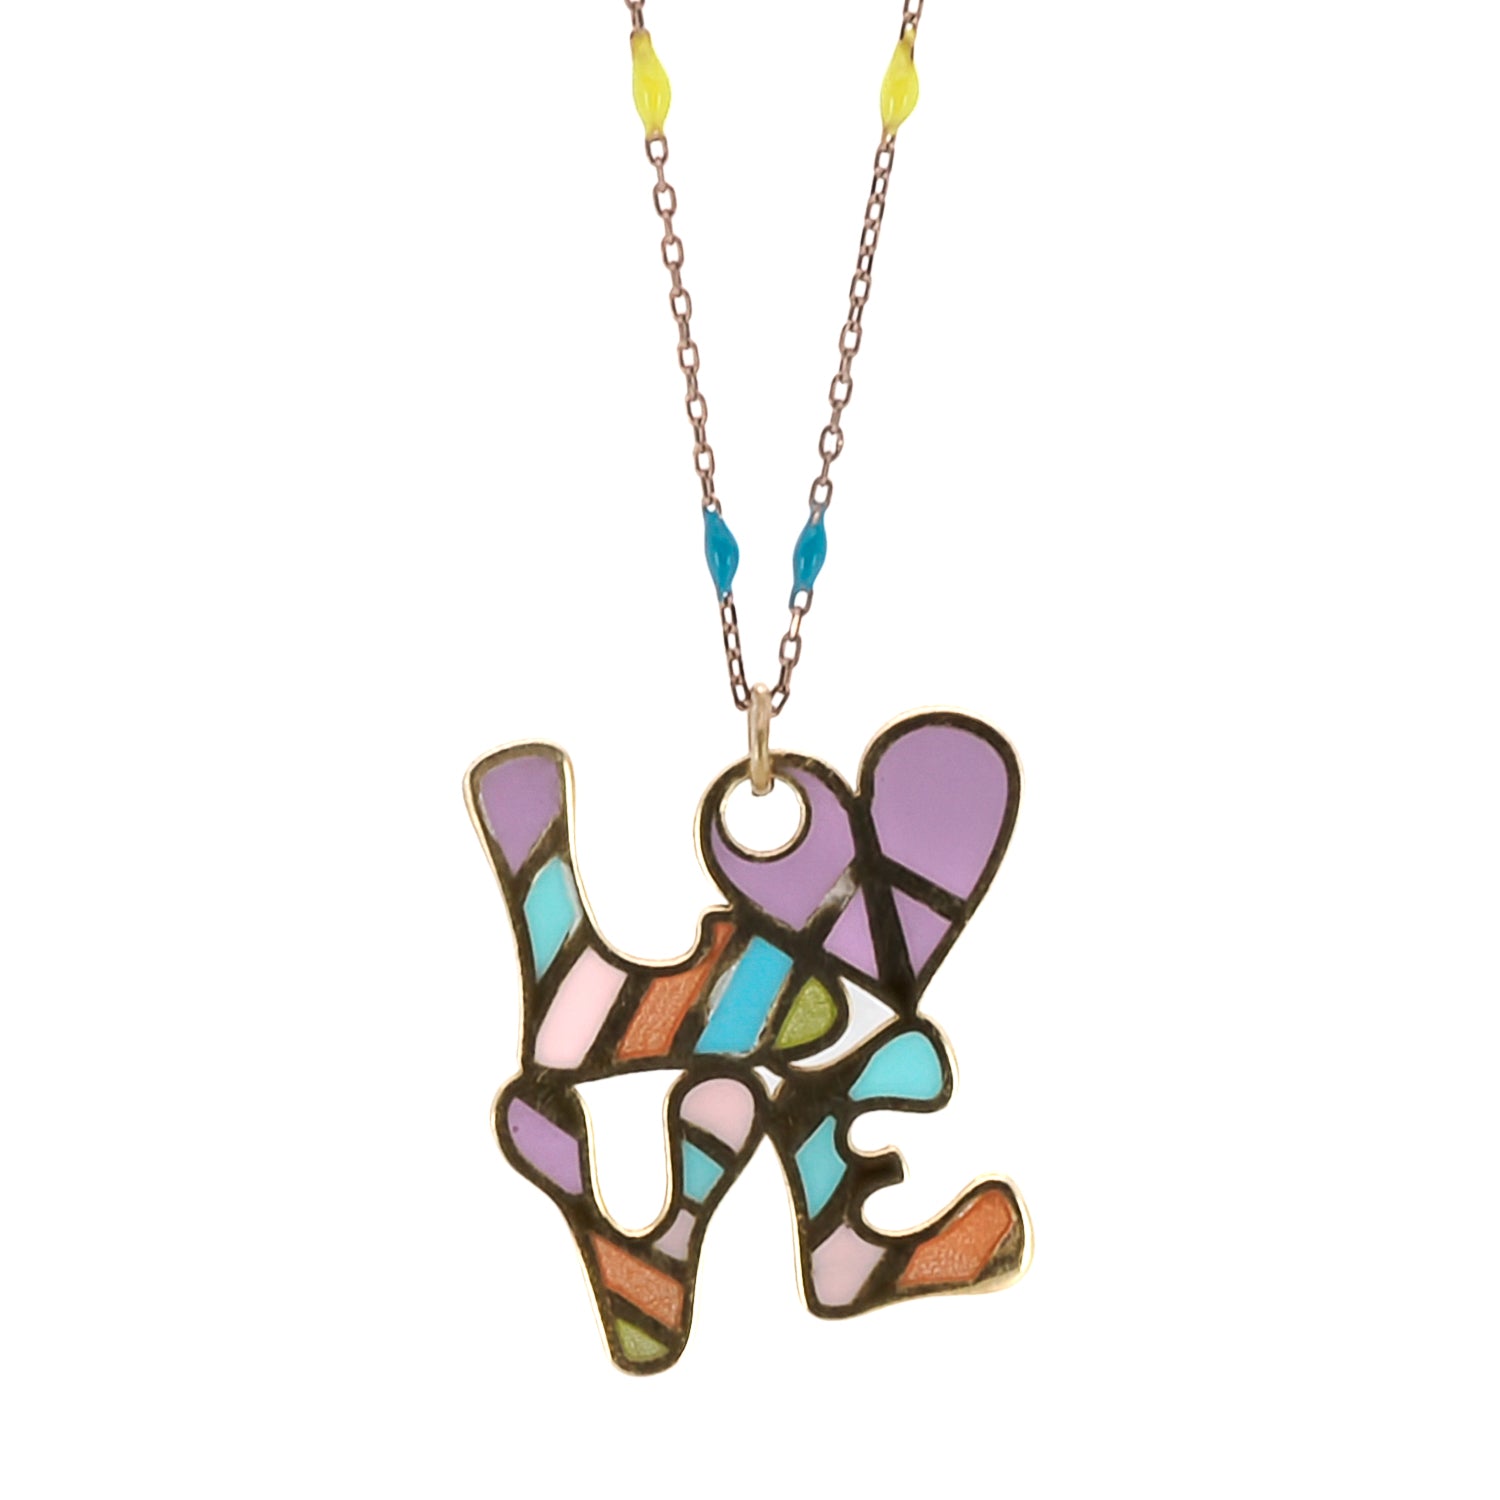 Handcrafted with care, the Color of Love Necklace showcases a beautiful "Love" pendant made of sterling silver and 18K gold plating. The colorful enamel accents make this necklace a sentimental and meaningful gift for your loved ones.